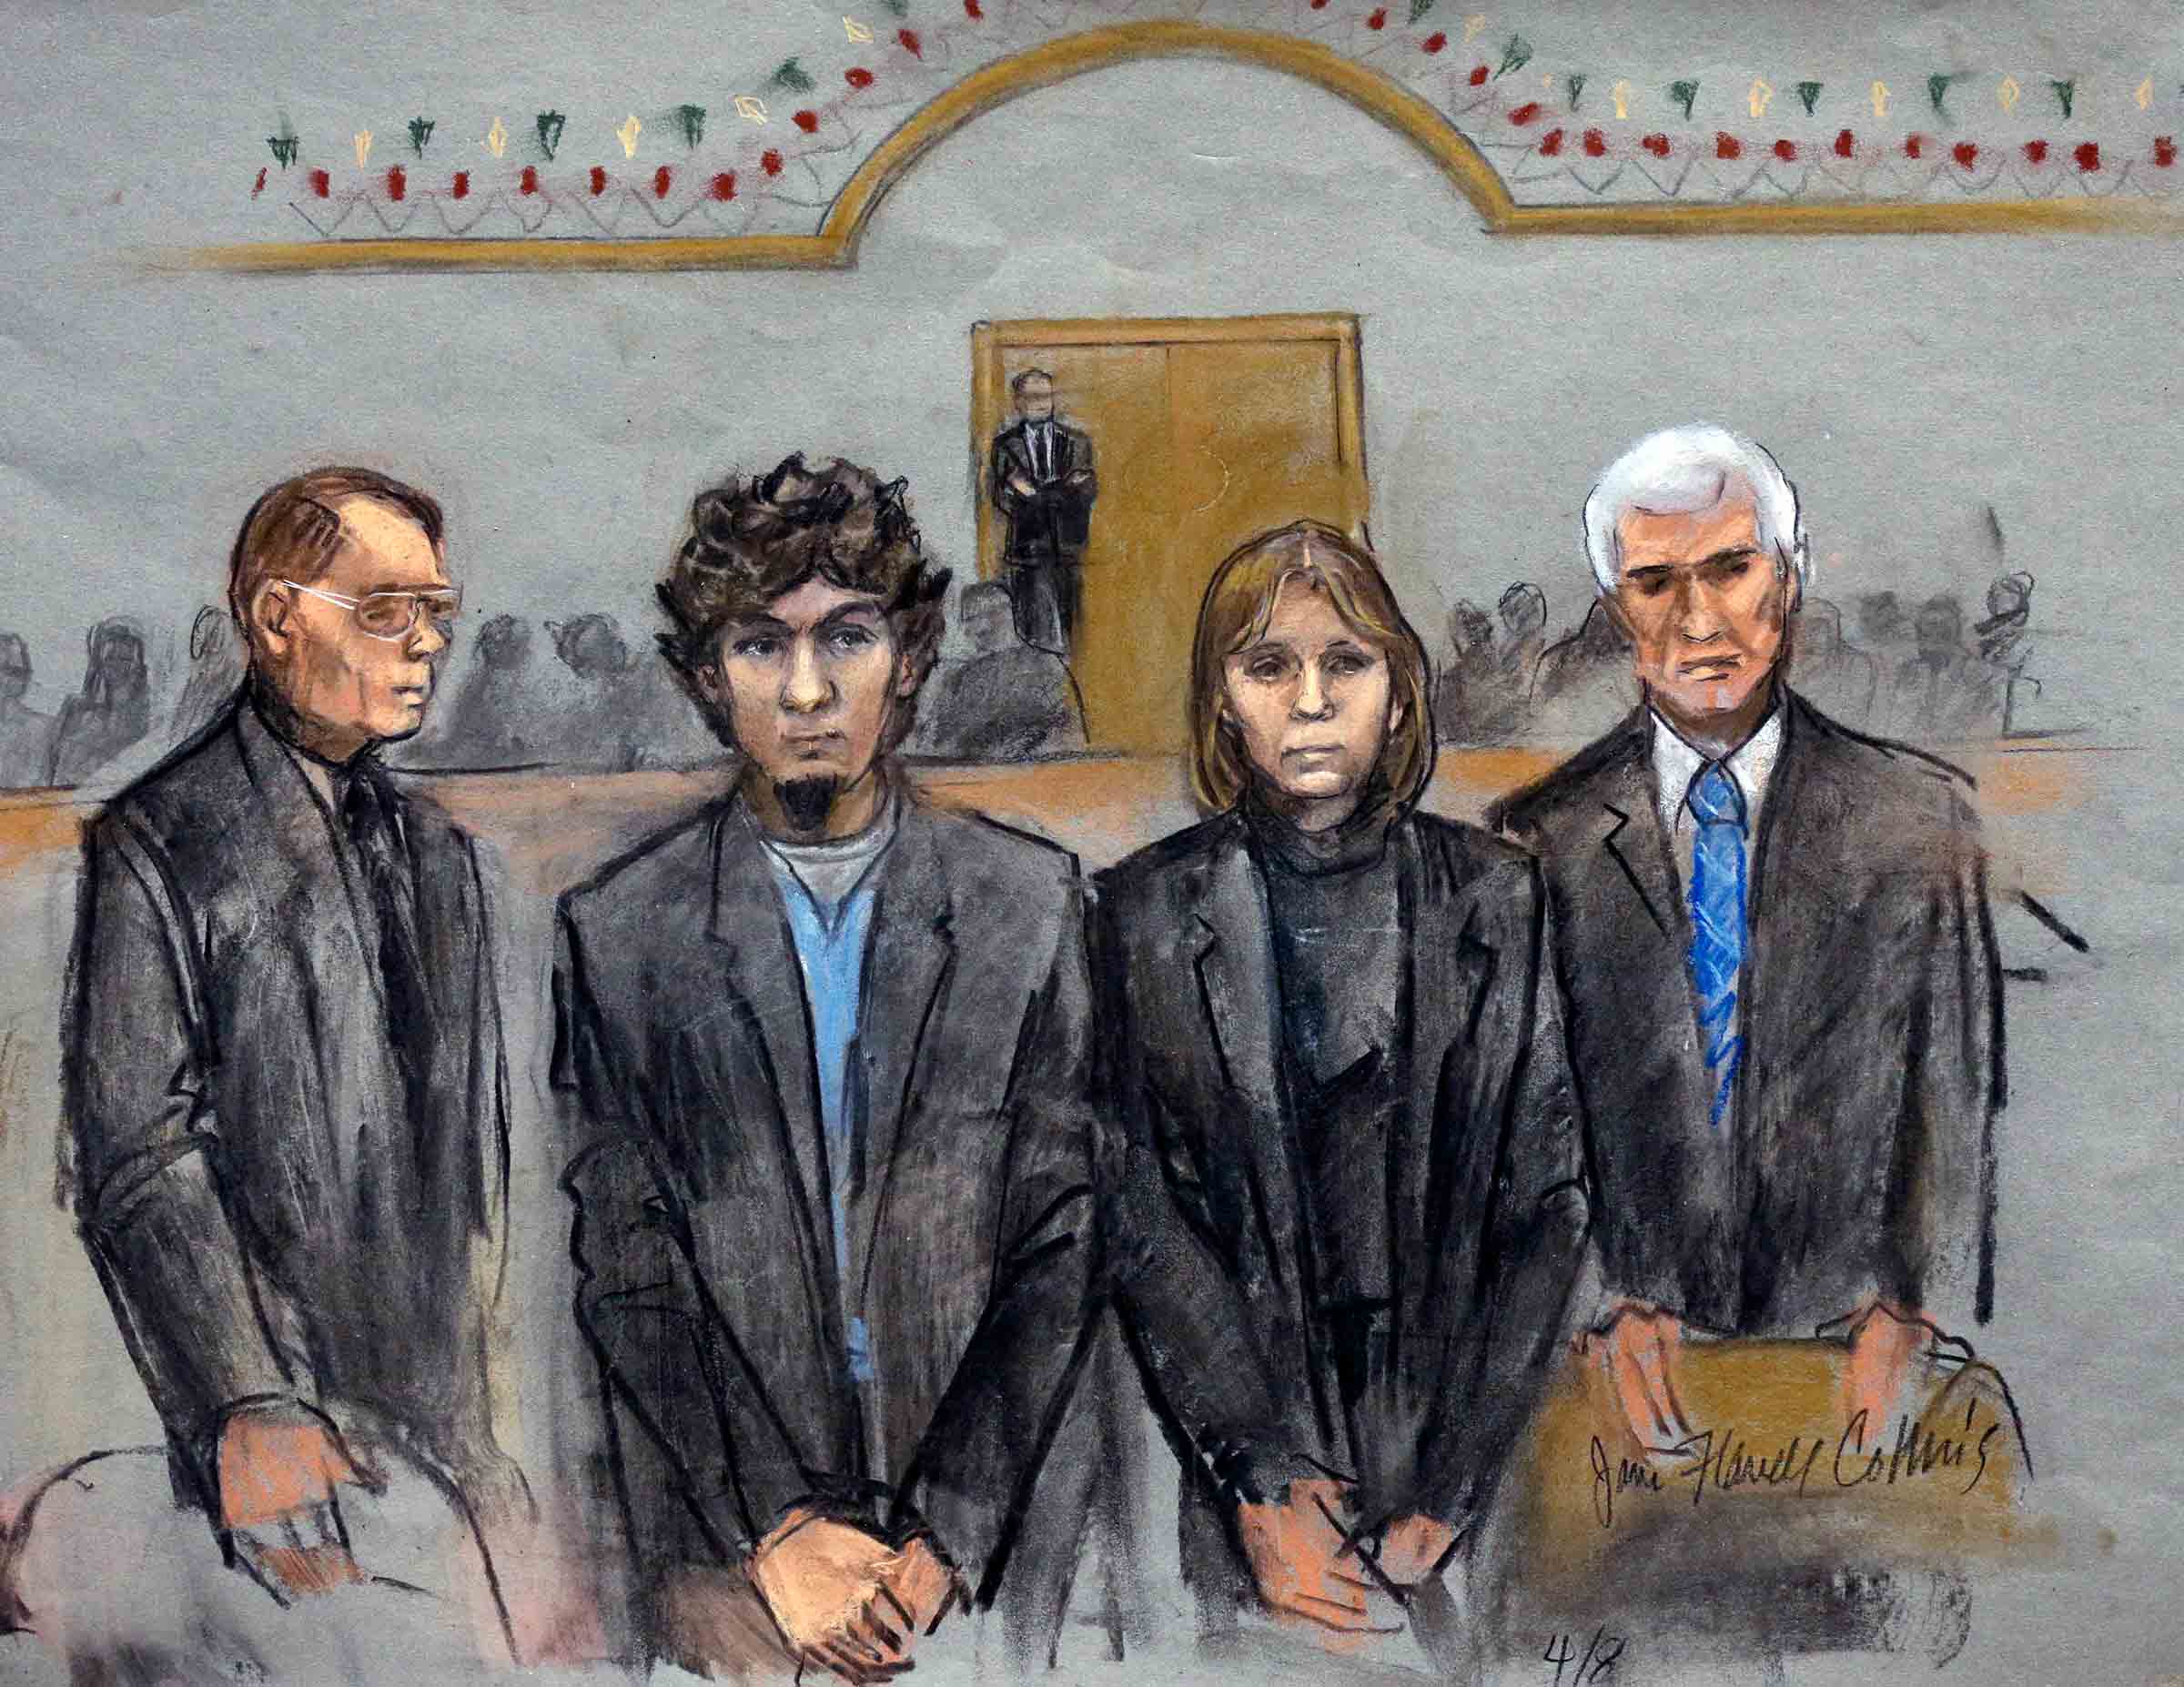 Courtroom sketch of Dzhokhar Tsarnaev, second from left standing with his defense attorneys William Fick, left, Judy Clarke, second from right, and David Bruck, right, as the jury presents its verdict in his federal death penalty trial Wednesday, April 8, 2015, in Boston (Jane Flavell Collins—AP)